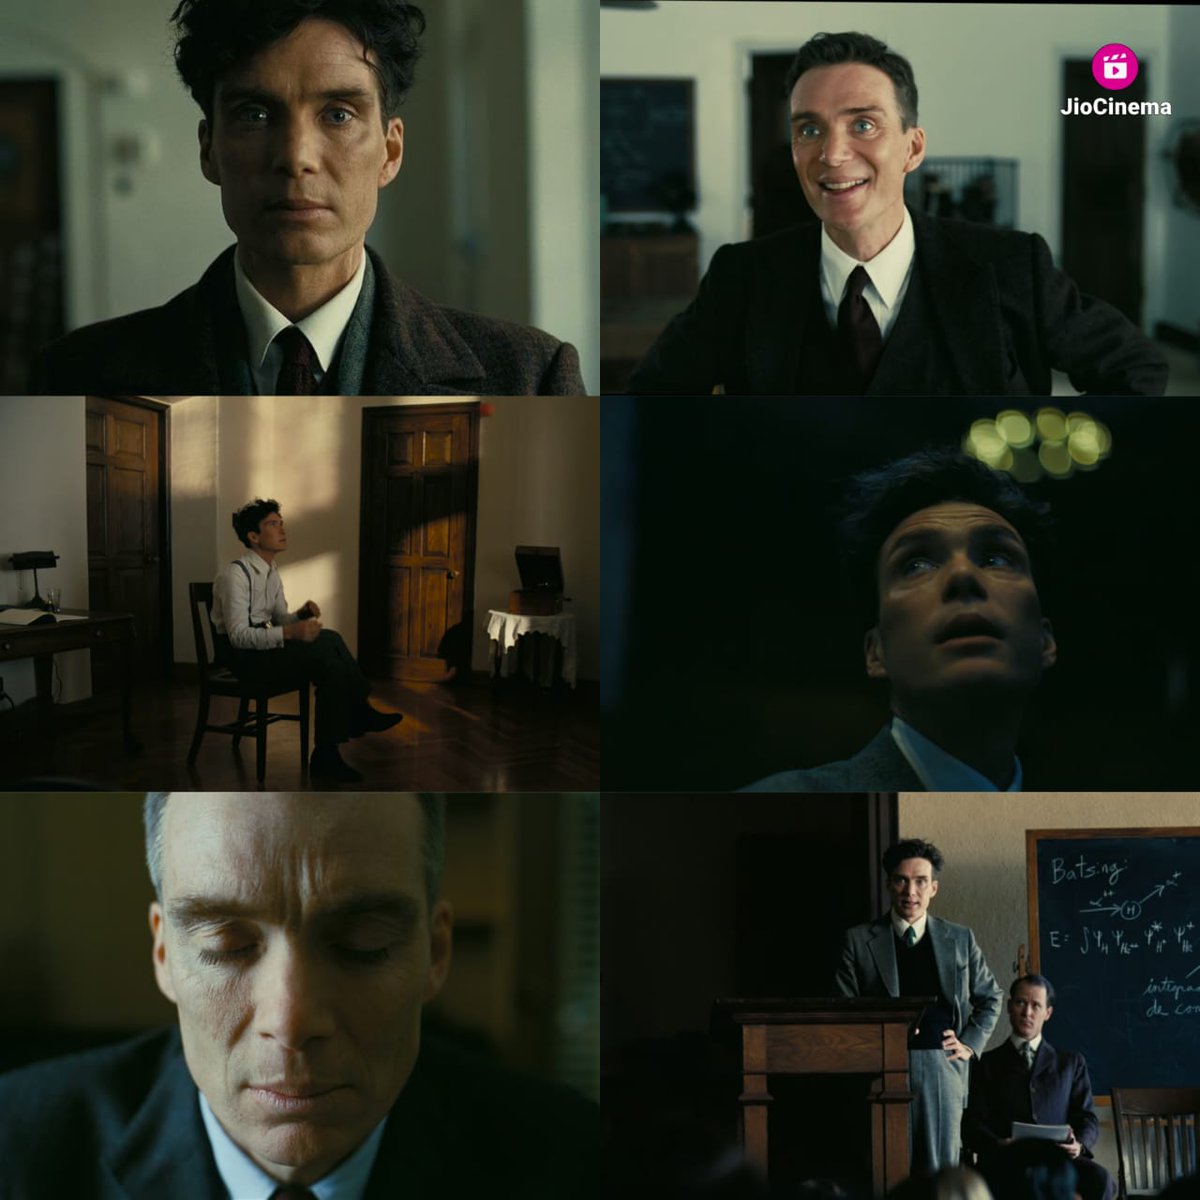 Cillian Murphy perfectly played his role in Oppenheimer.
#OppenheimerOnJioCinema